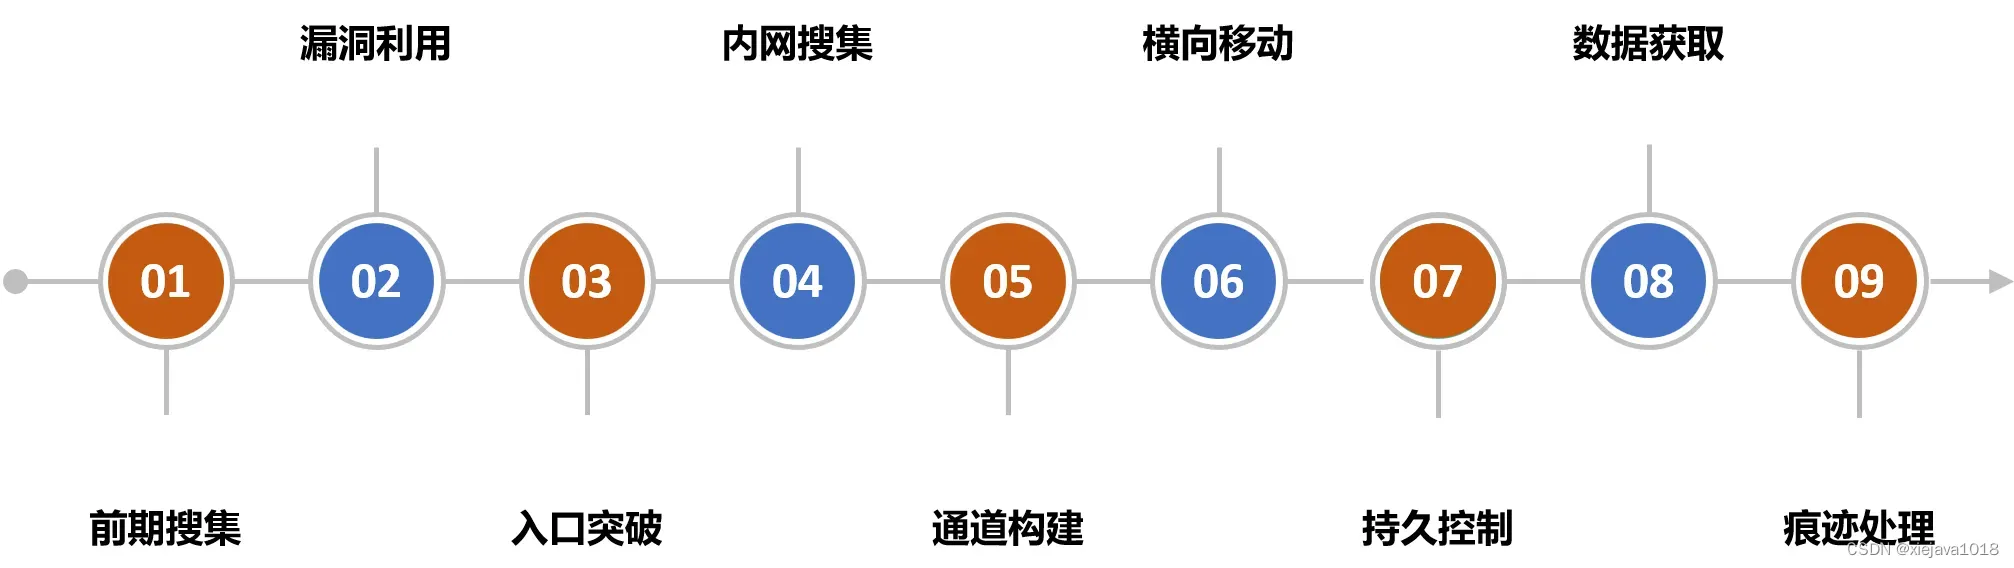 <span style='color:red;'>什么</span><span style='color:red;'>是</span>HW，企业<span style='color:red;'>如何</span>进行HW<span style='color:red;'>保障</span>？